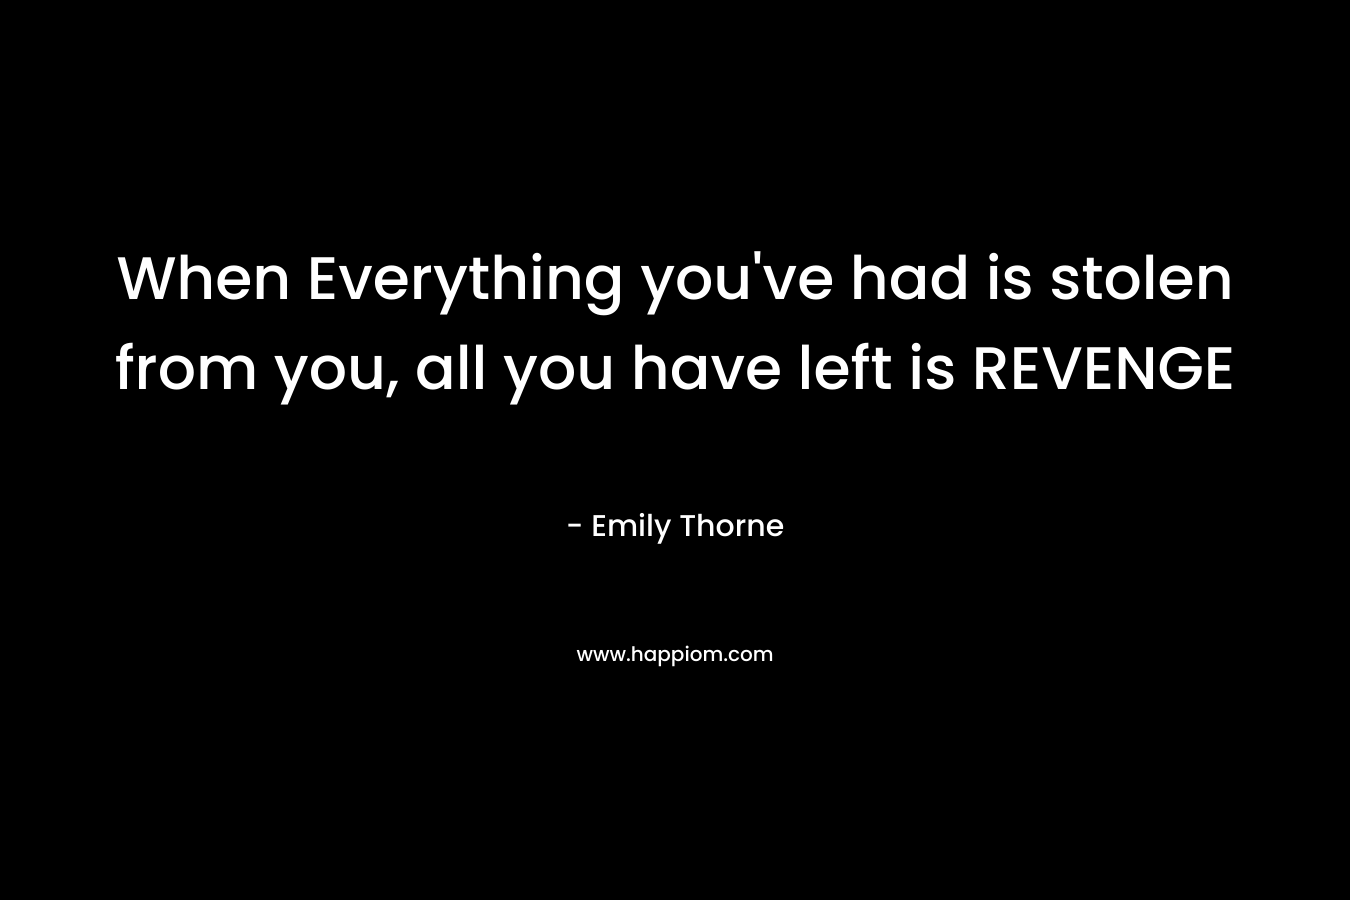 When Everything you’ve had is stolen from you, all you have left is REVENGE – Emily Thorne